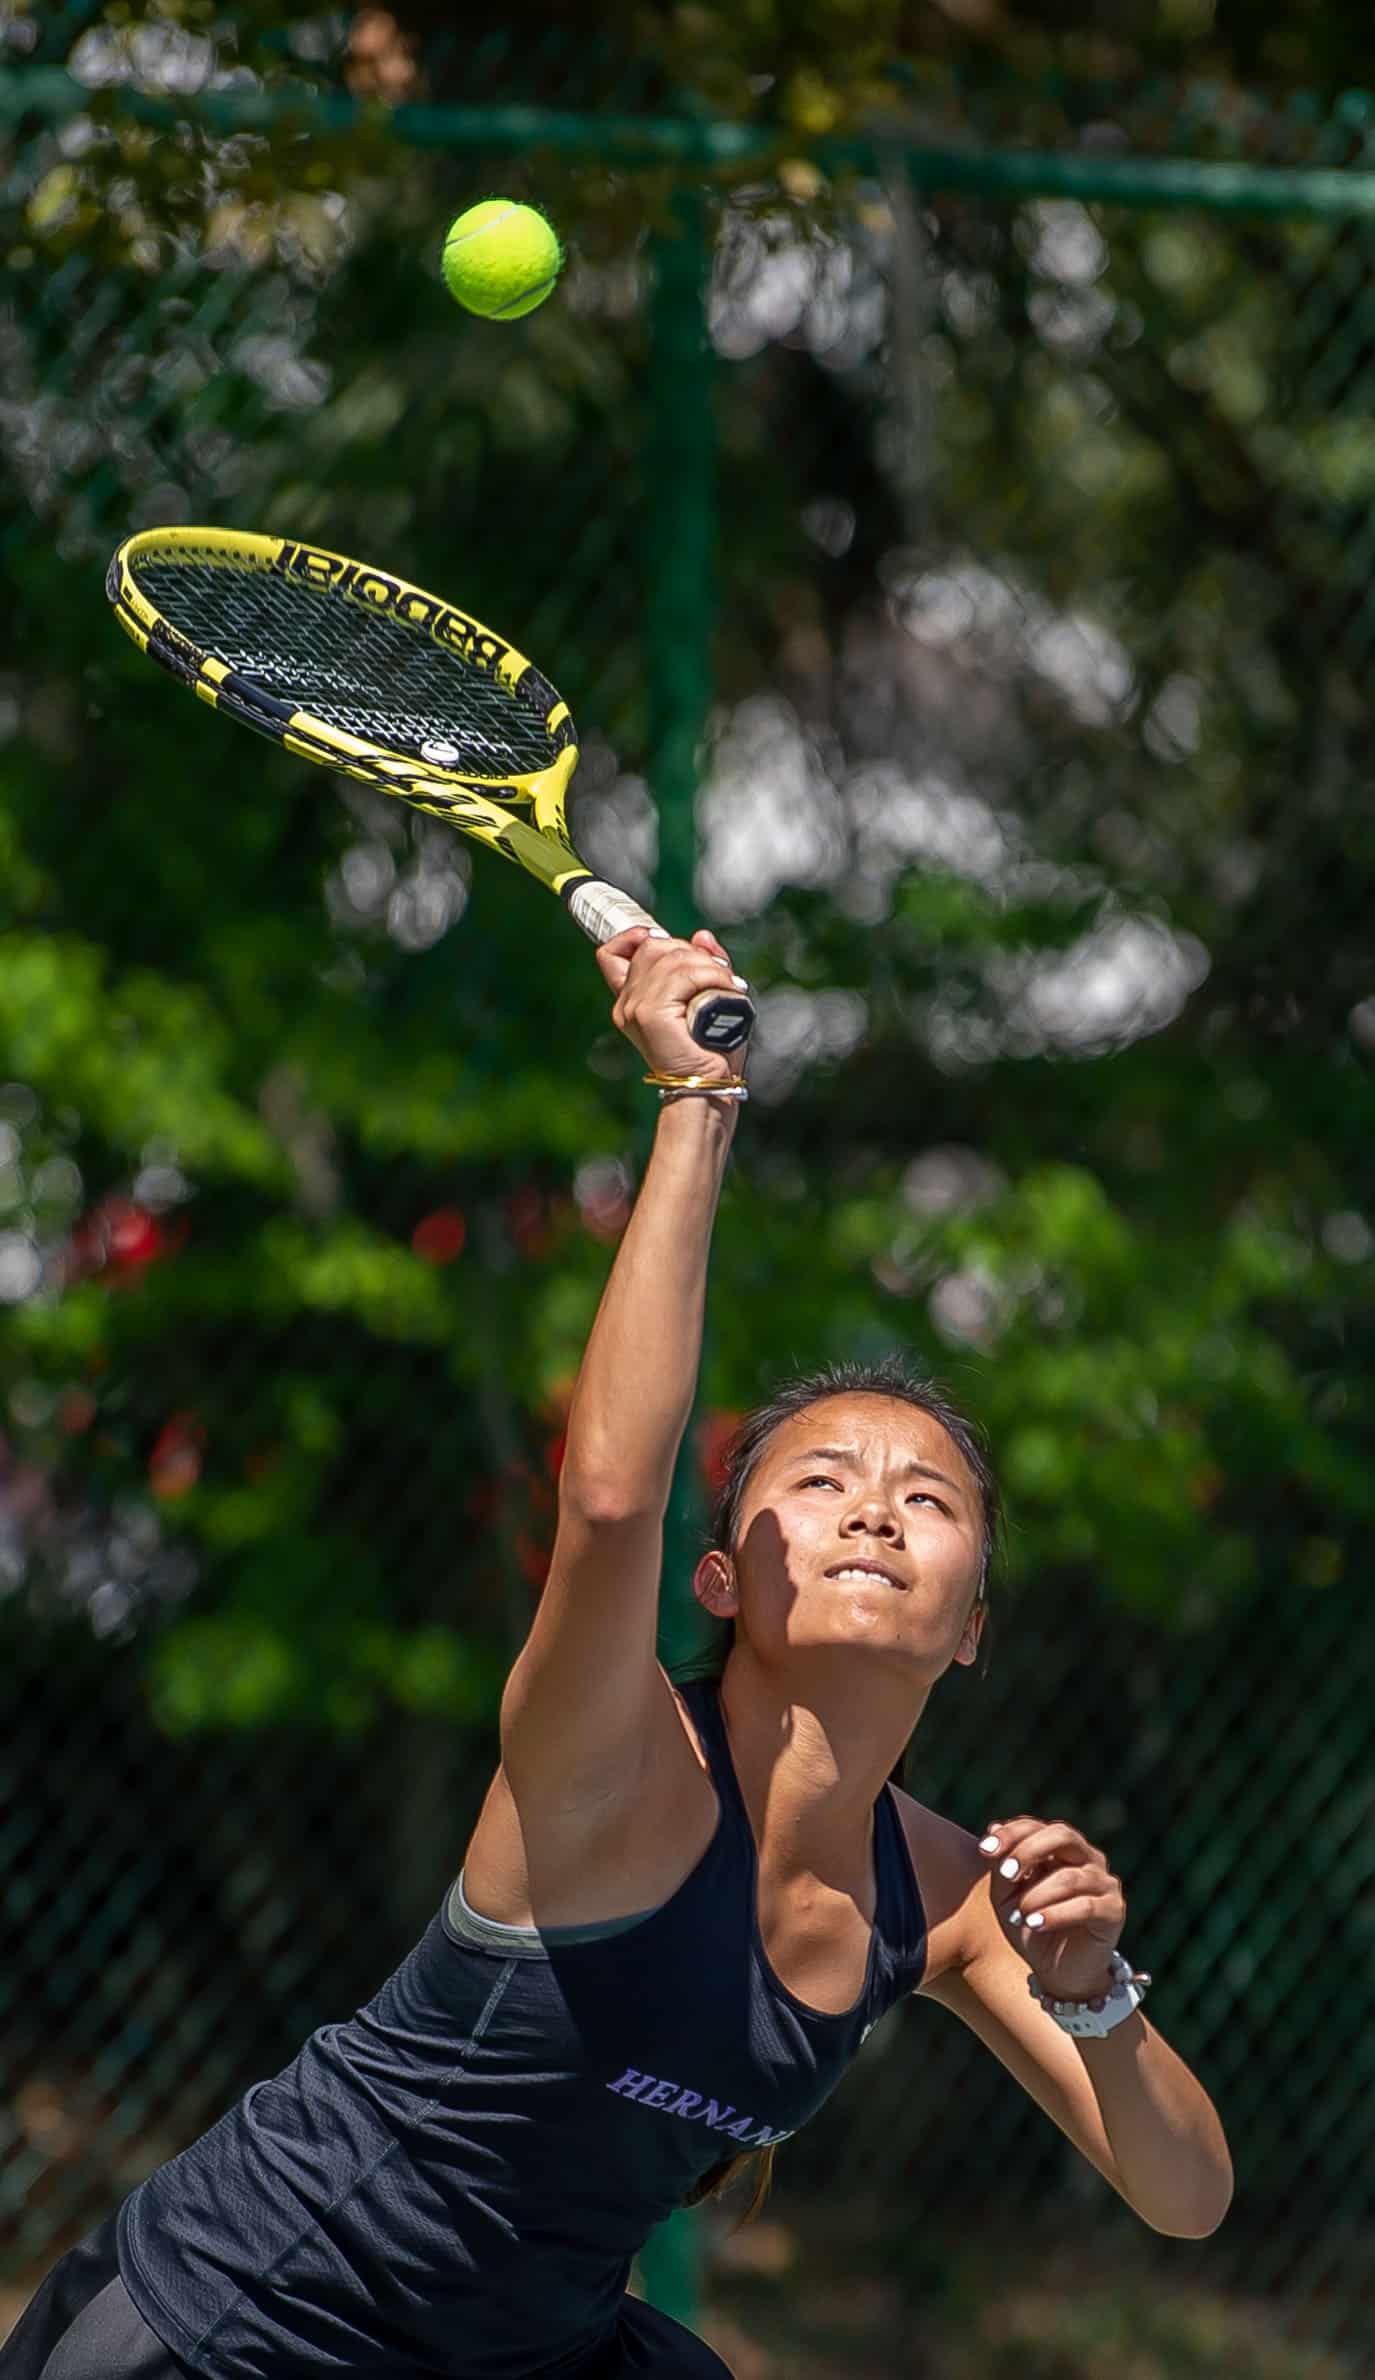 Hernando High’s Mia Liu concentrates during a serve in a doubles match versus Central High at Brooksville Park Tuesday afternoon. Photo by JOE DiCRISTOFALO